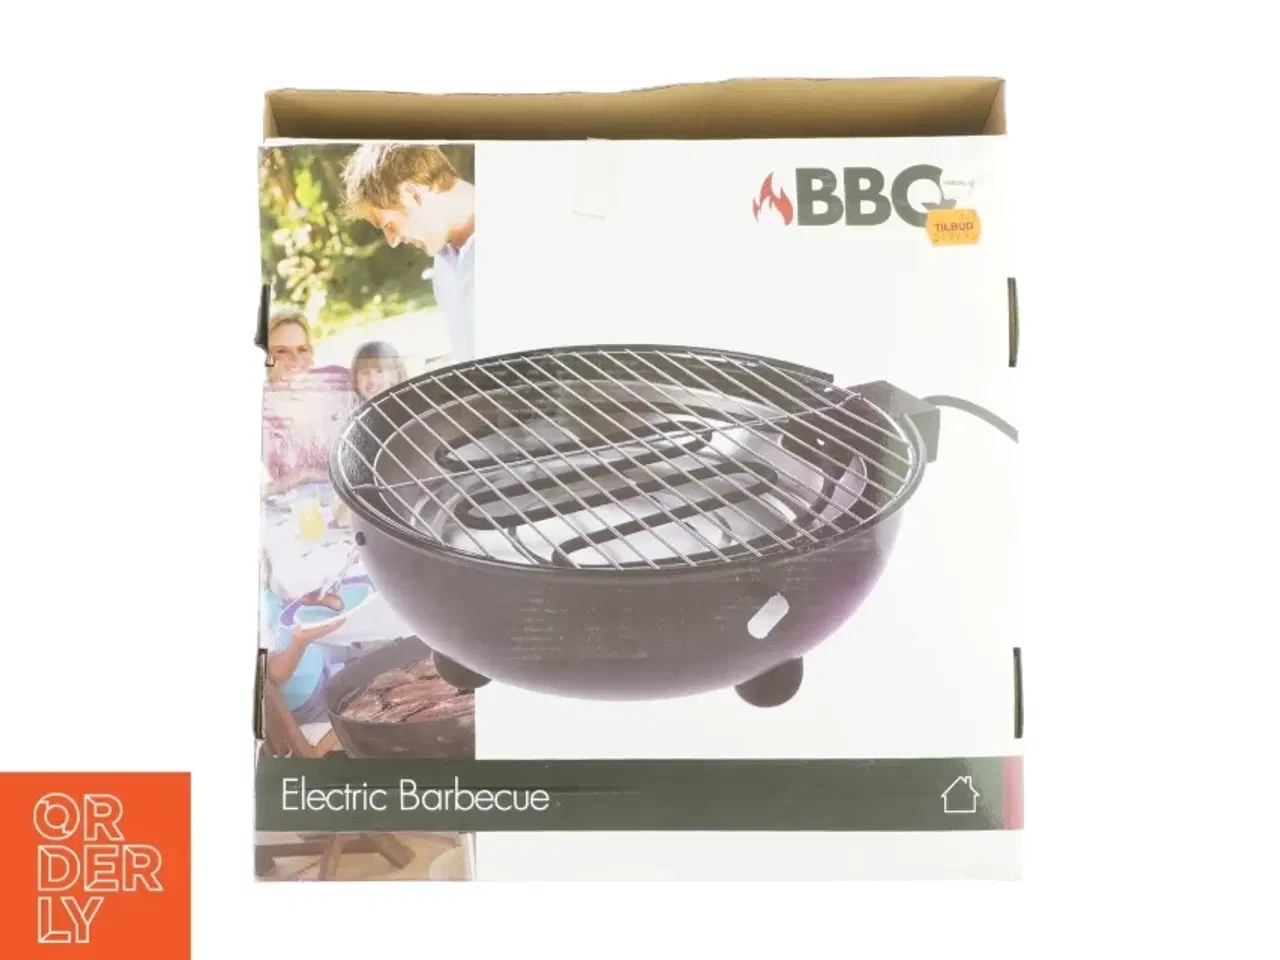 Billede 2 - Electric barbecue grill